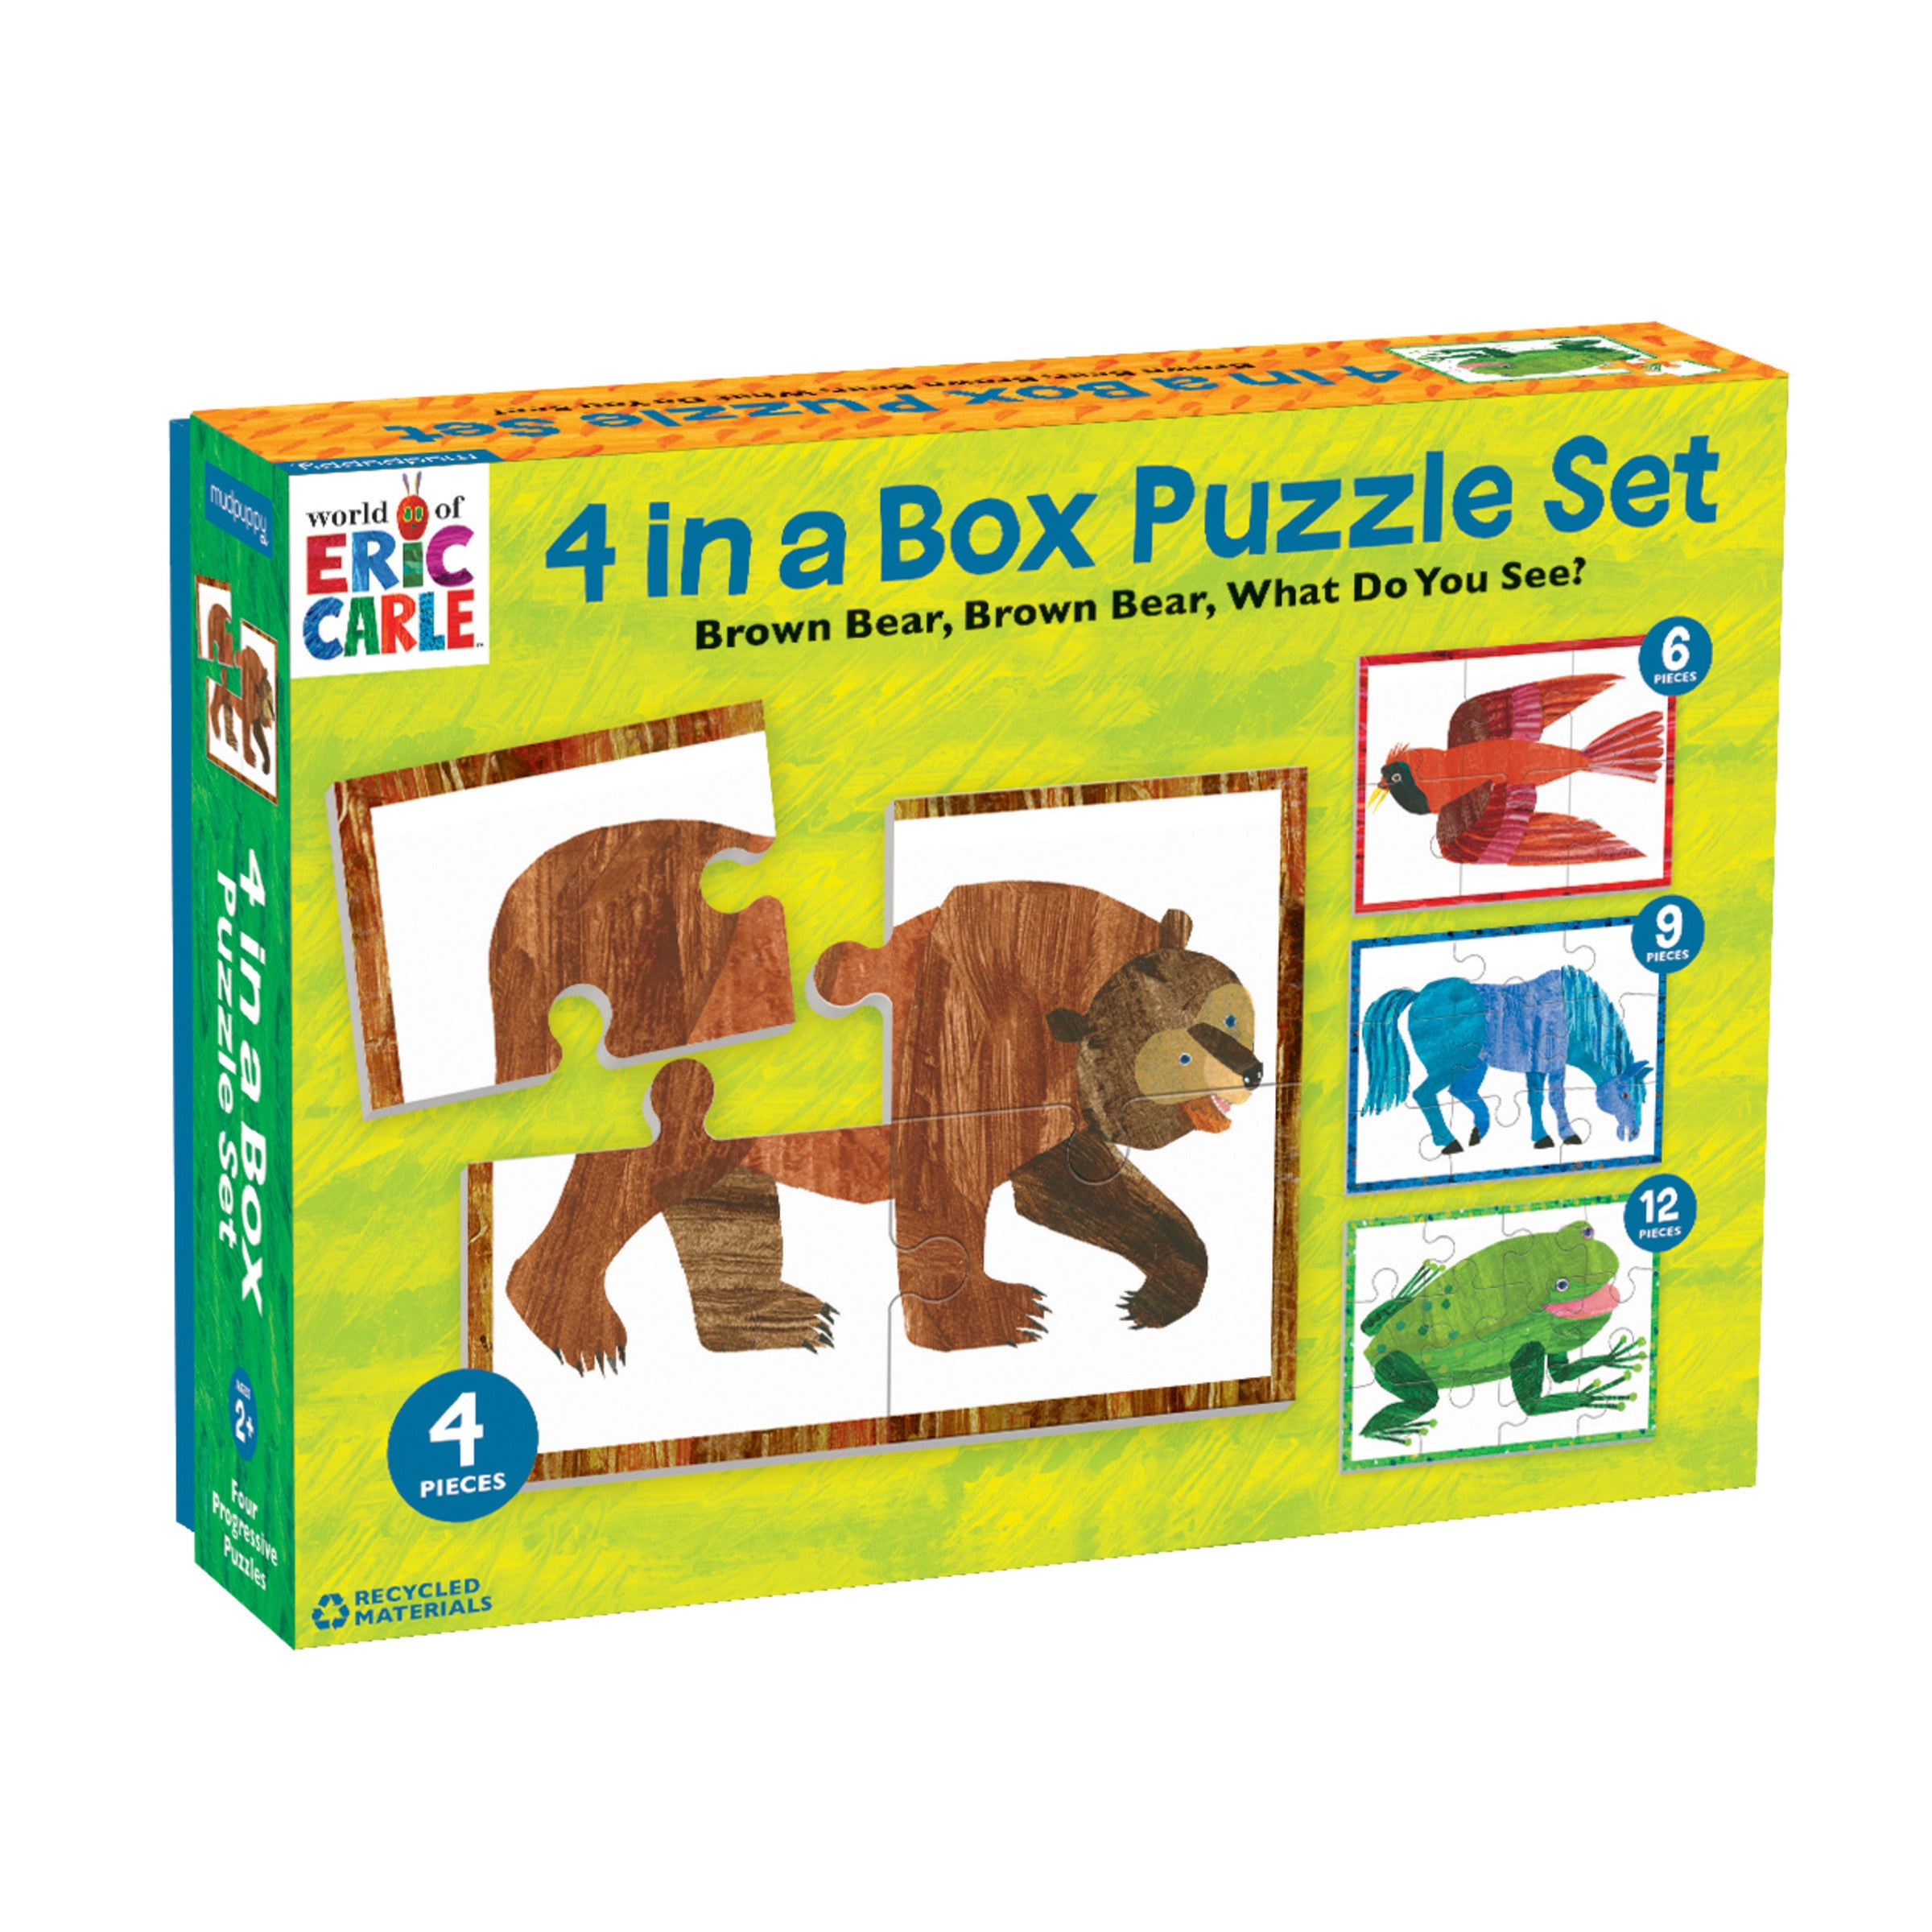 Eric　4-in-1　Bear　of　World　–　Carle-　Set　a　Brown　Puzzle　Upon　Once　Bookstore